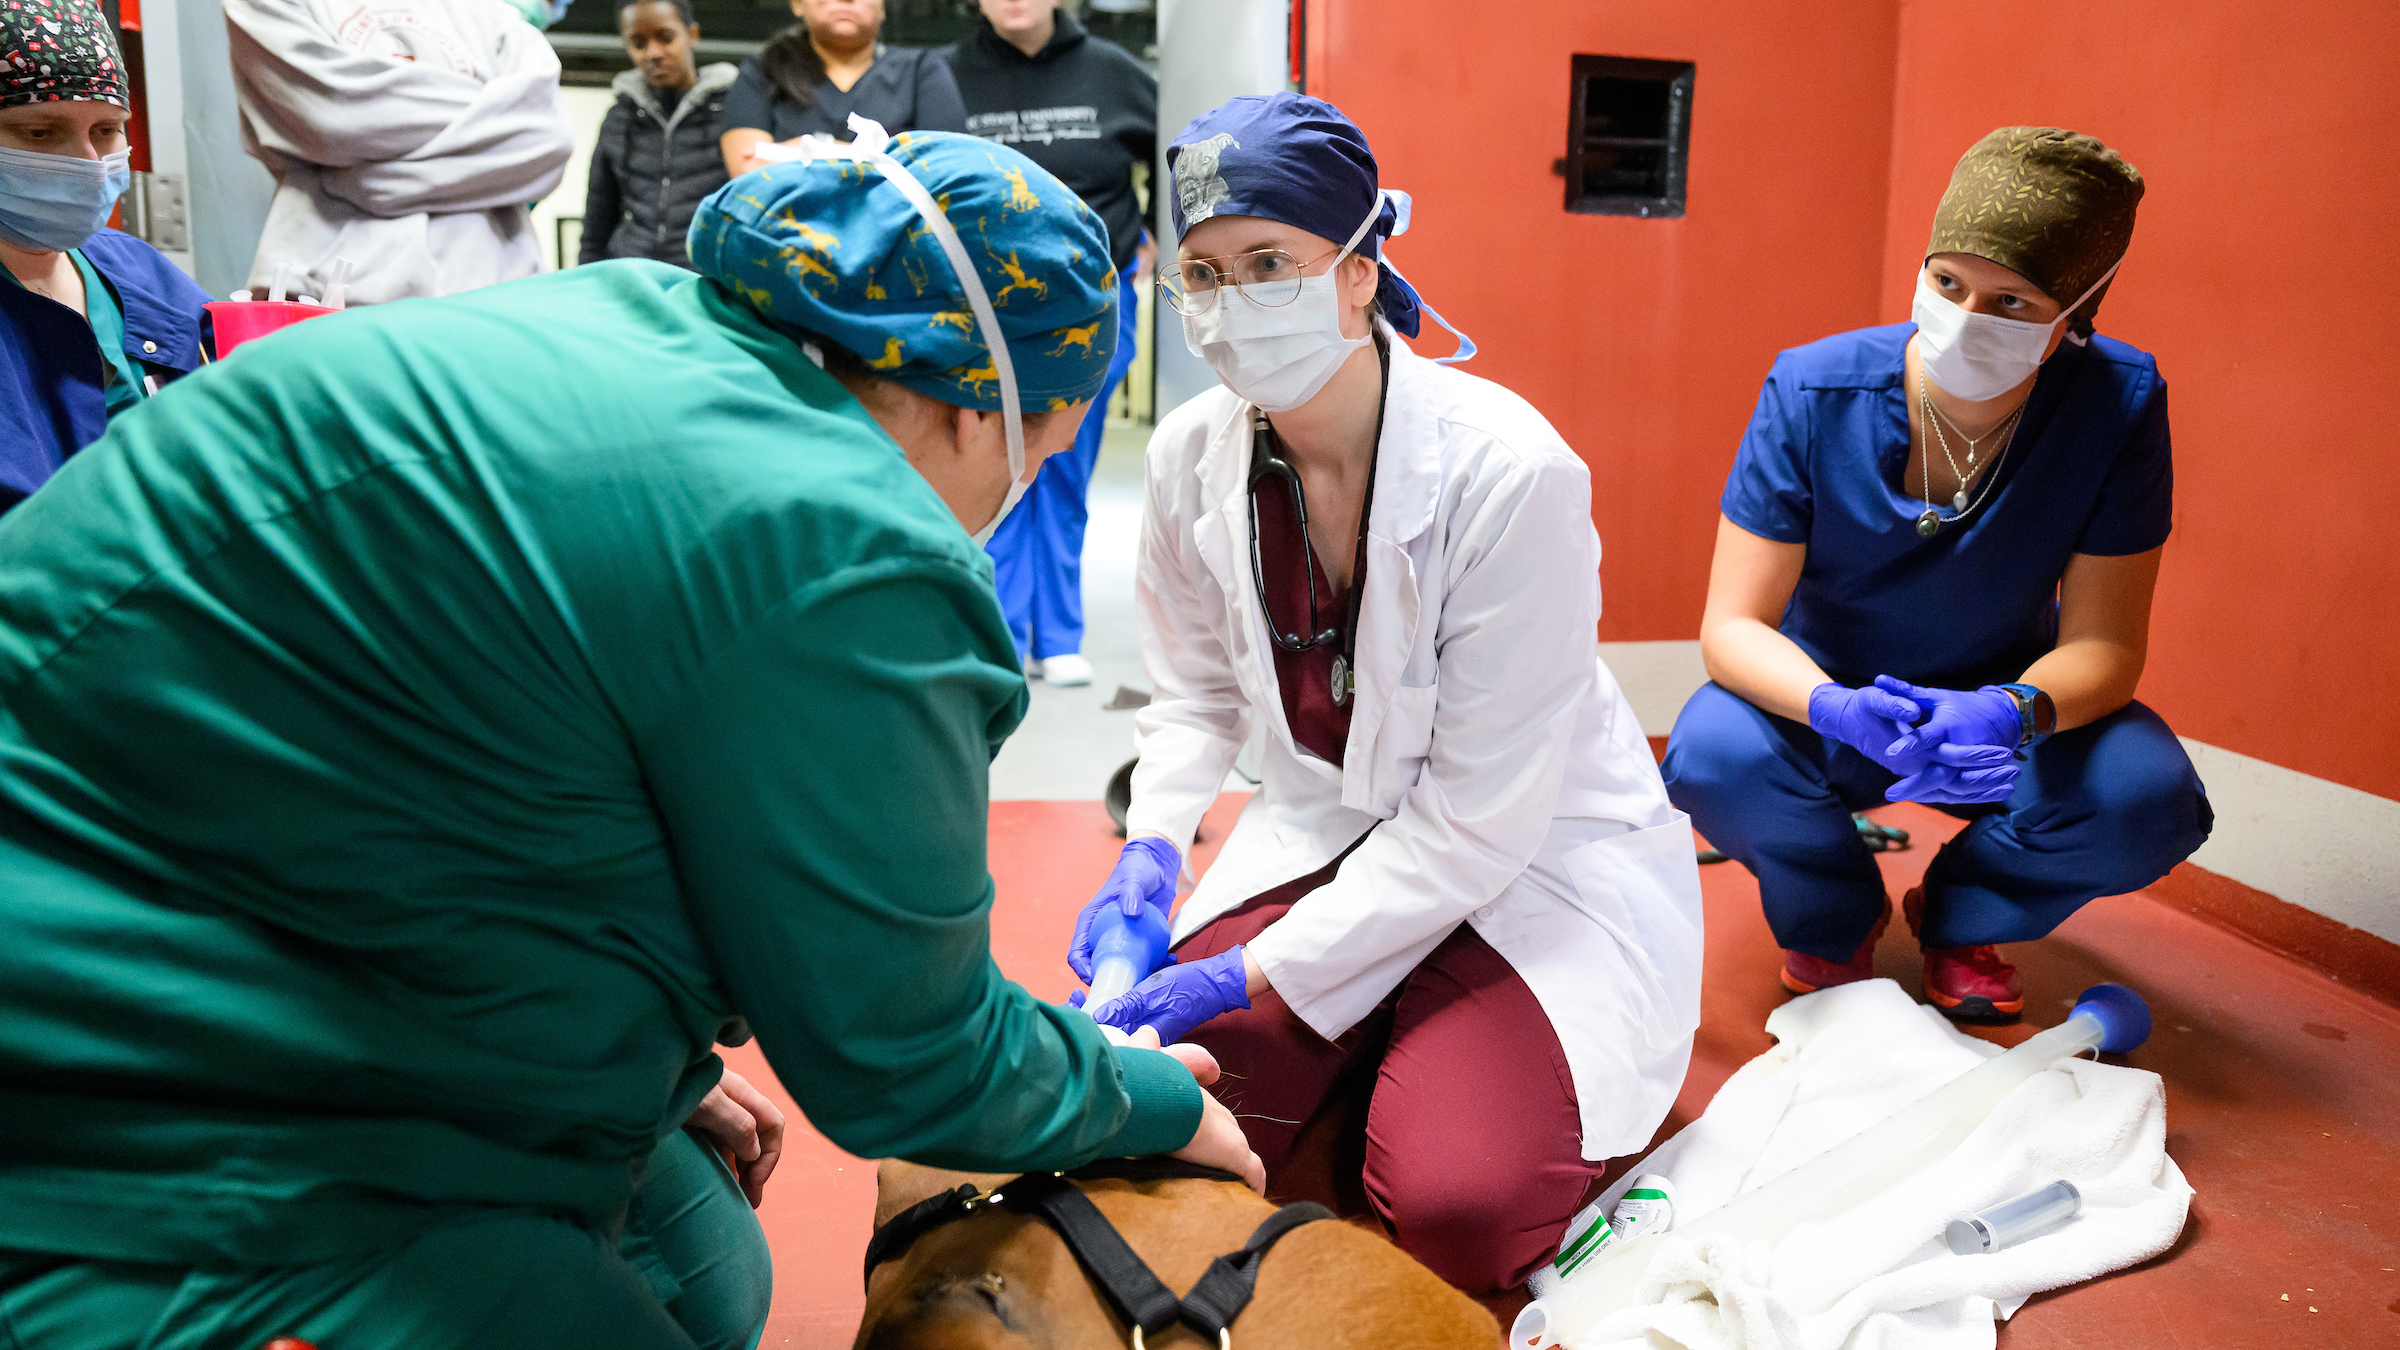 An anesthesiologist dressed in green scrubs works to intubate a brown horse as two students assist her.